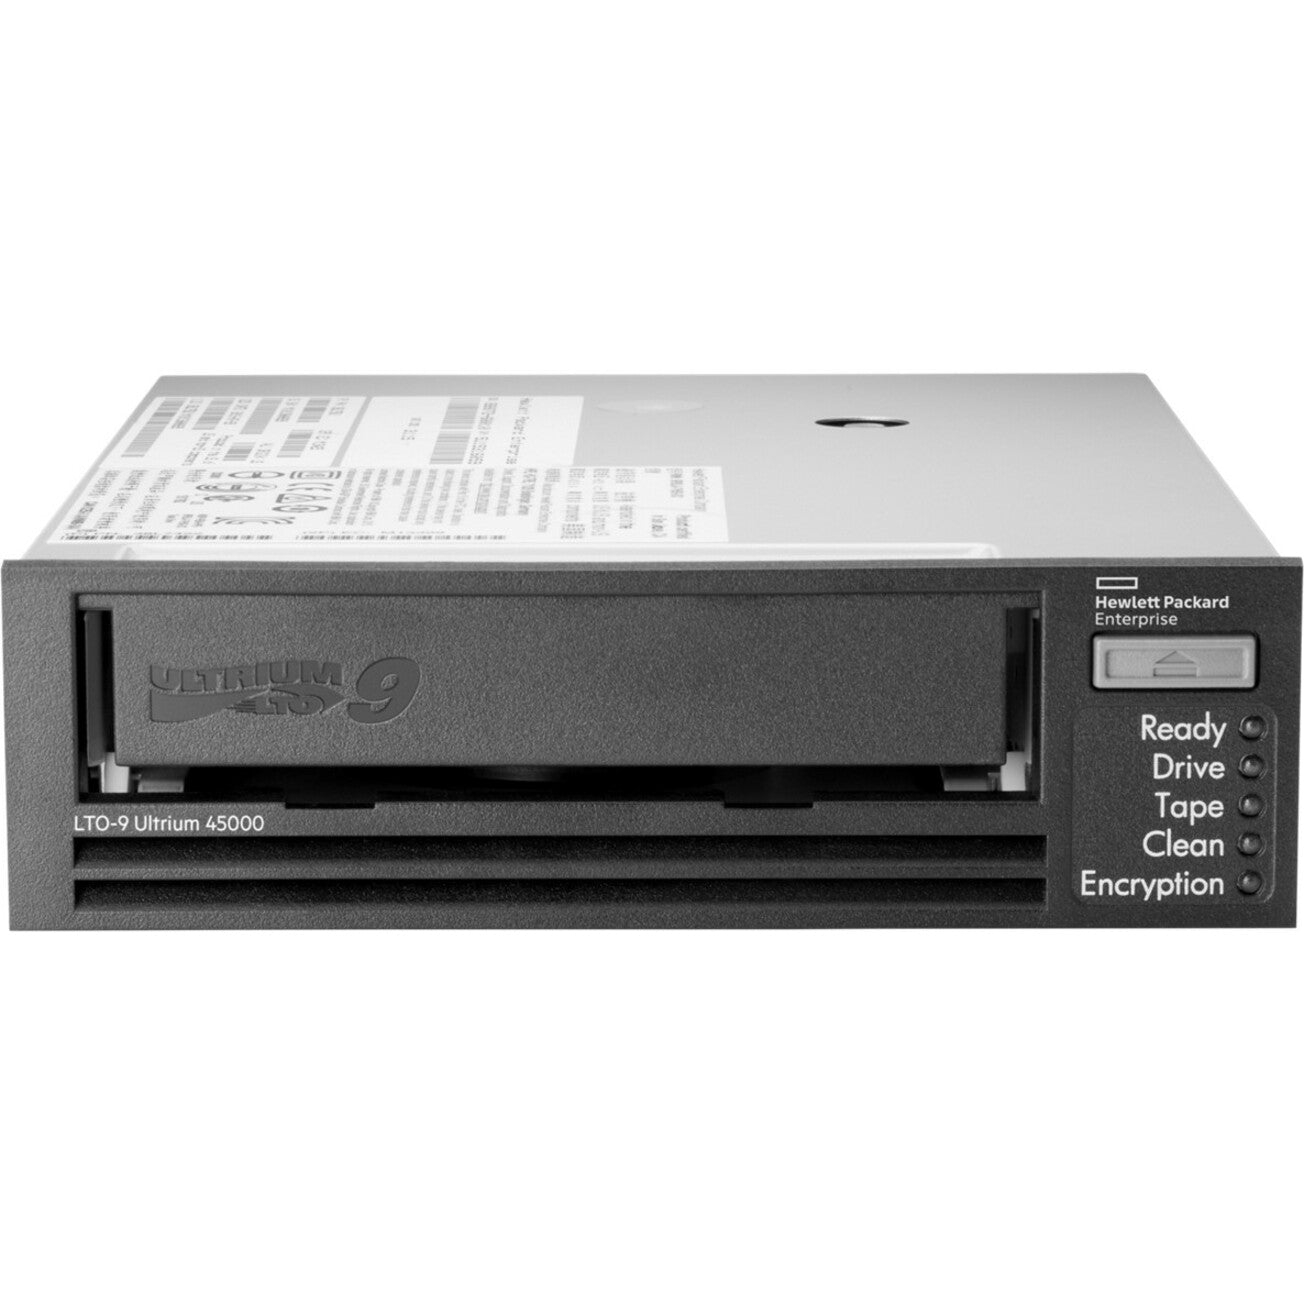 HPE BC040A StoreEver LTO-9 Ultrium 45000 Internal Tape Drive, 18TB Native Capacity, 45TB Compressed Capacity